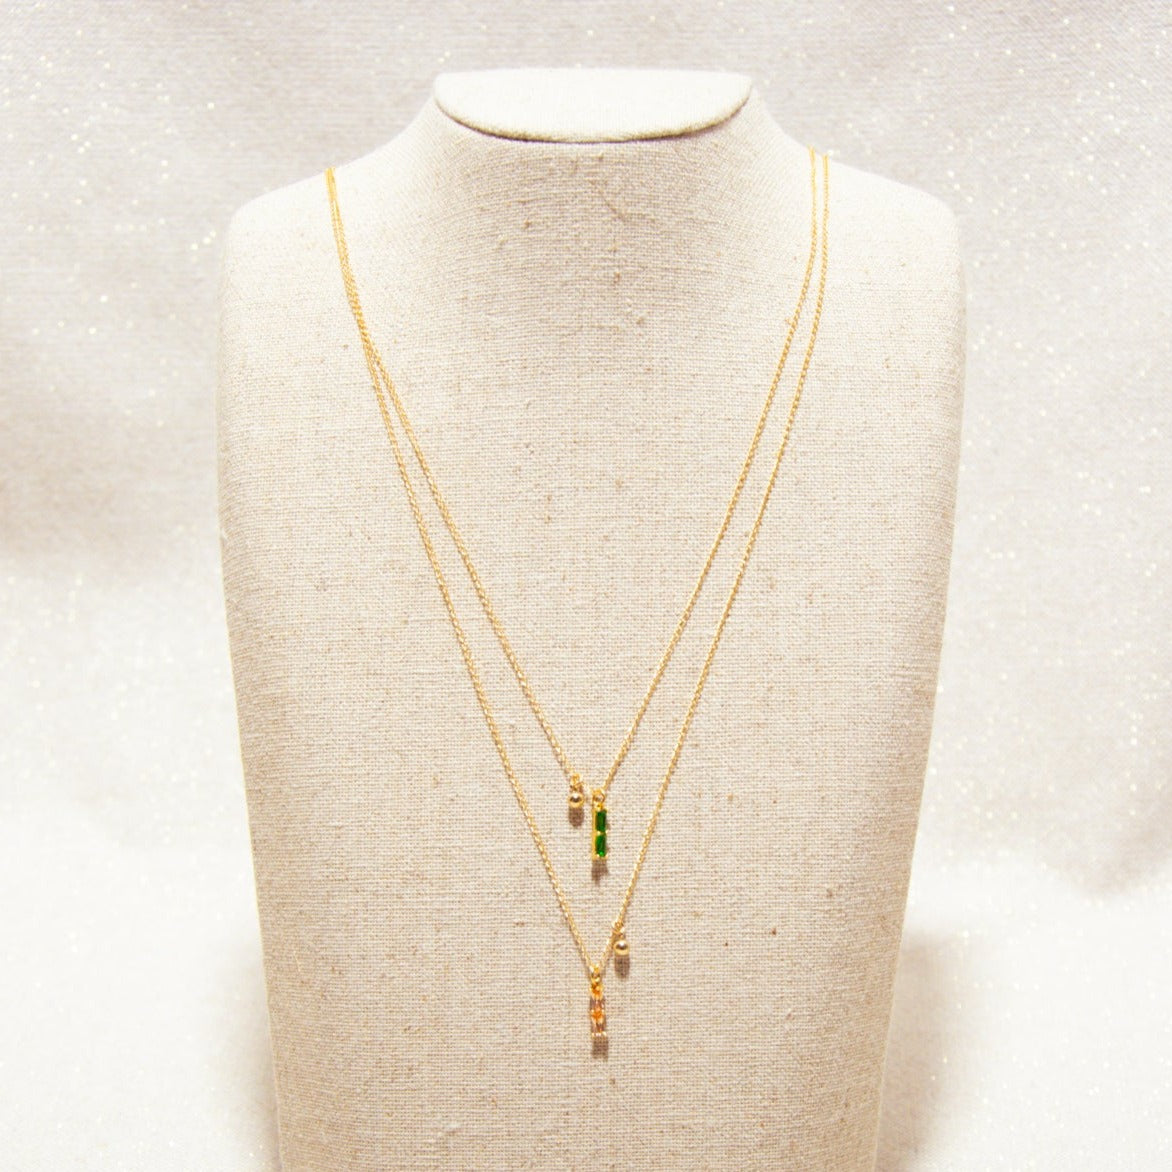 Chain Necklace - Emerald Green Double Zircon Wand